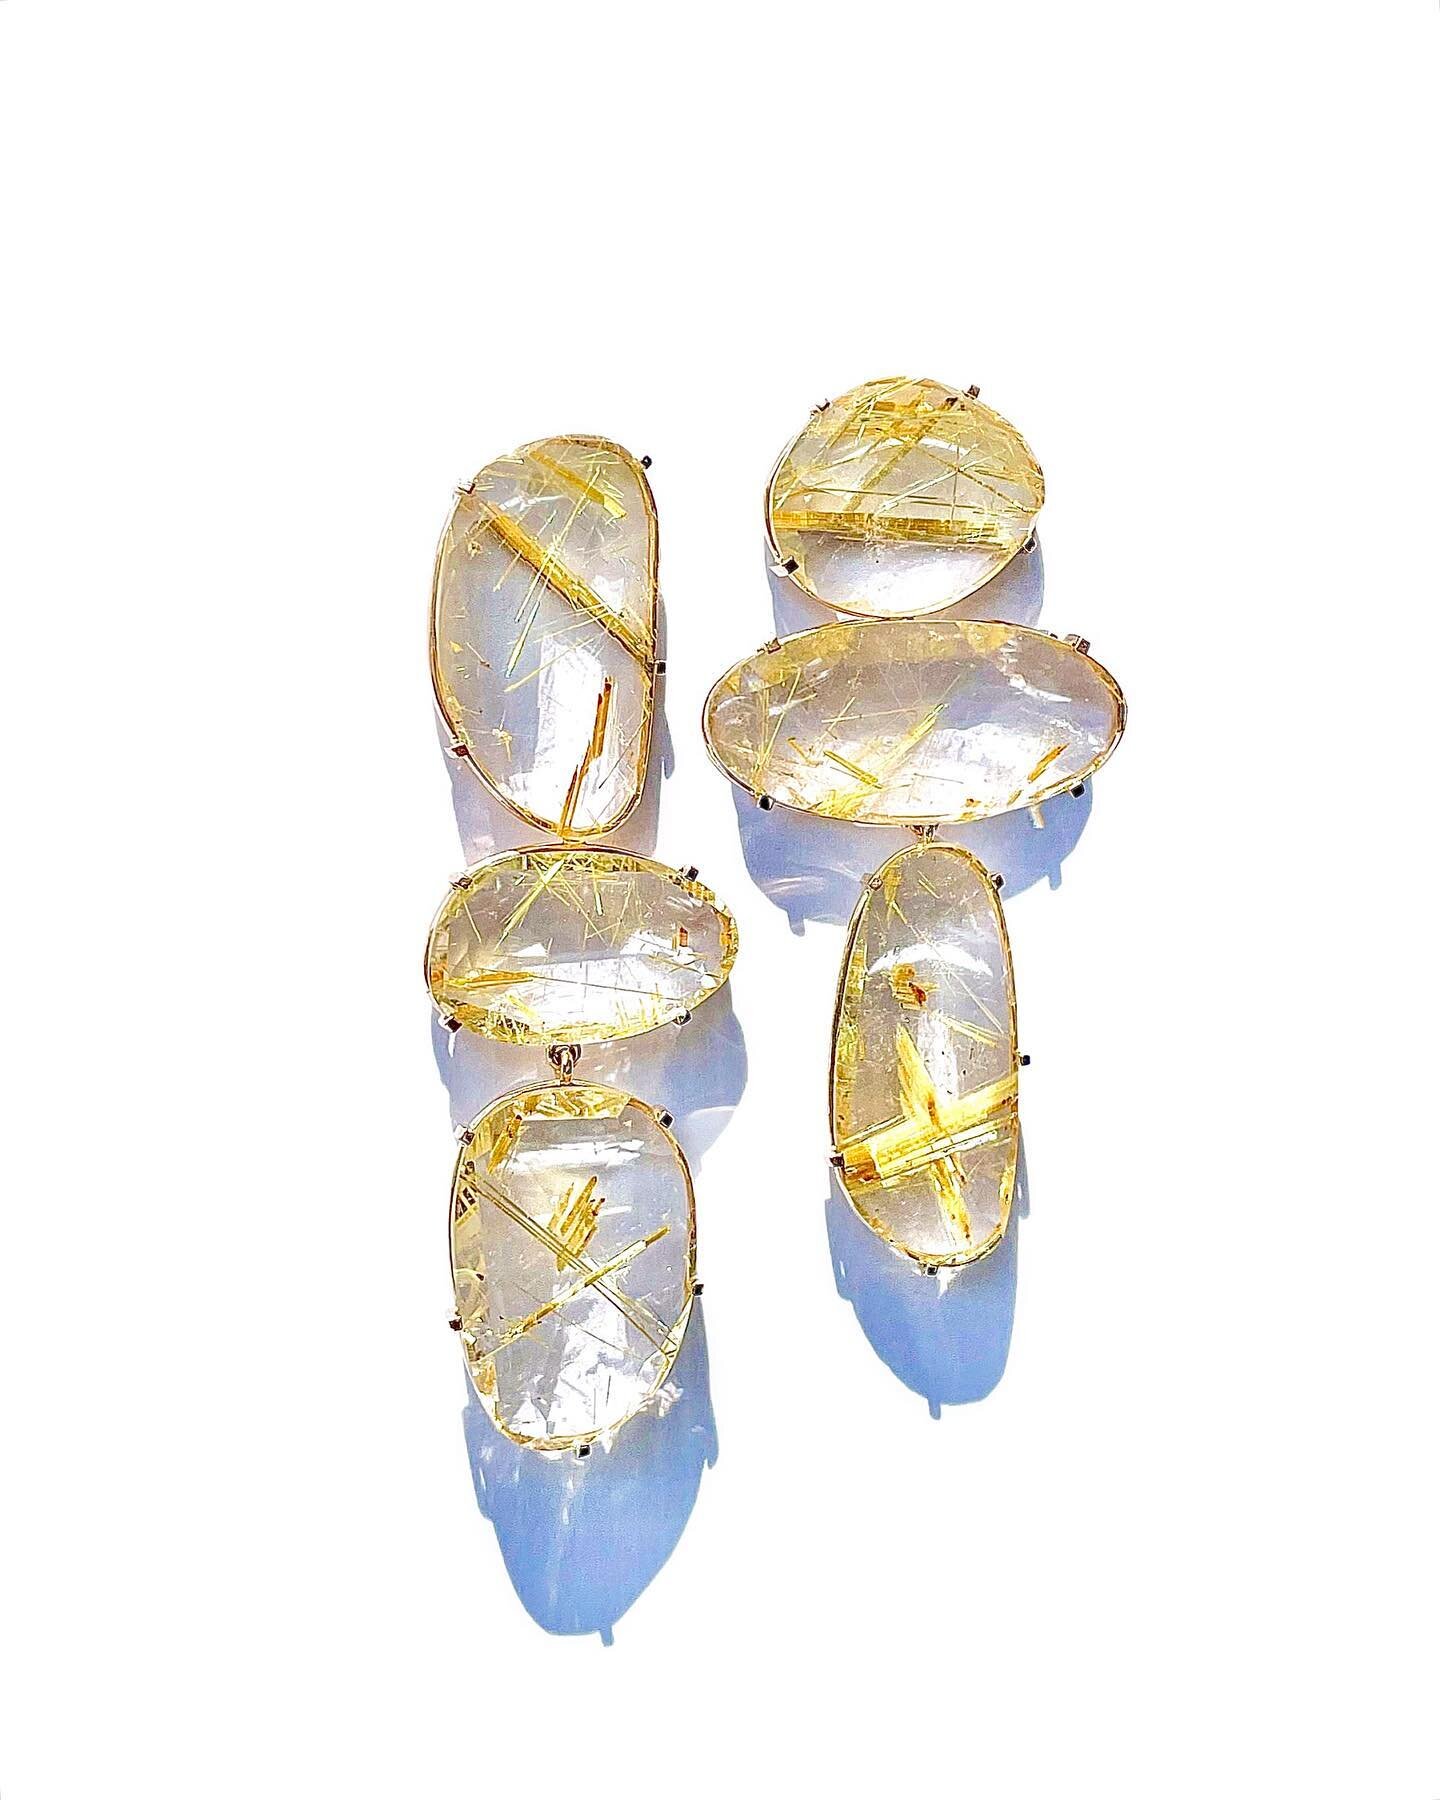 It really is impossible to capture the beauty of the shimmer and exquisite cuts of these beautiful Rutilated Quartz set in 9ct gold. 

#idaelsje_earrings 
#idaelsje_balancingstonecollection 
#capetowndesign
#capetownjewellery